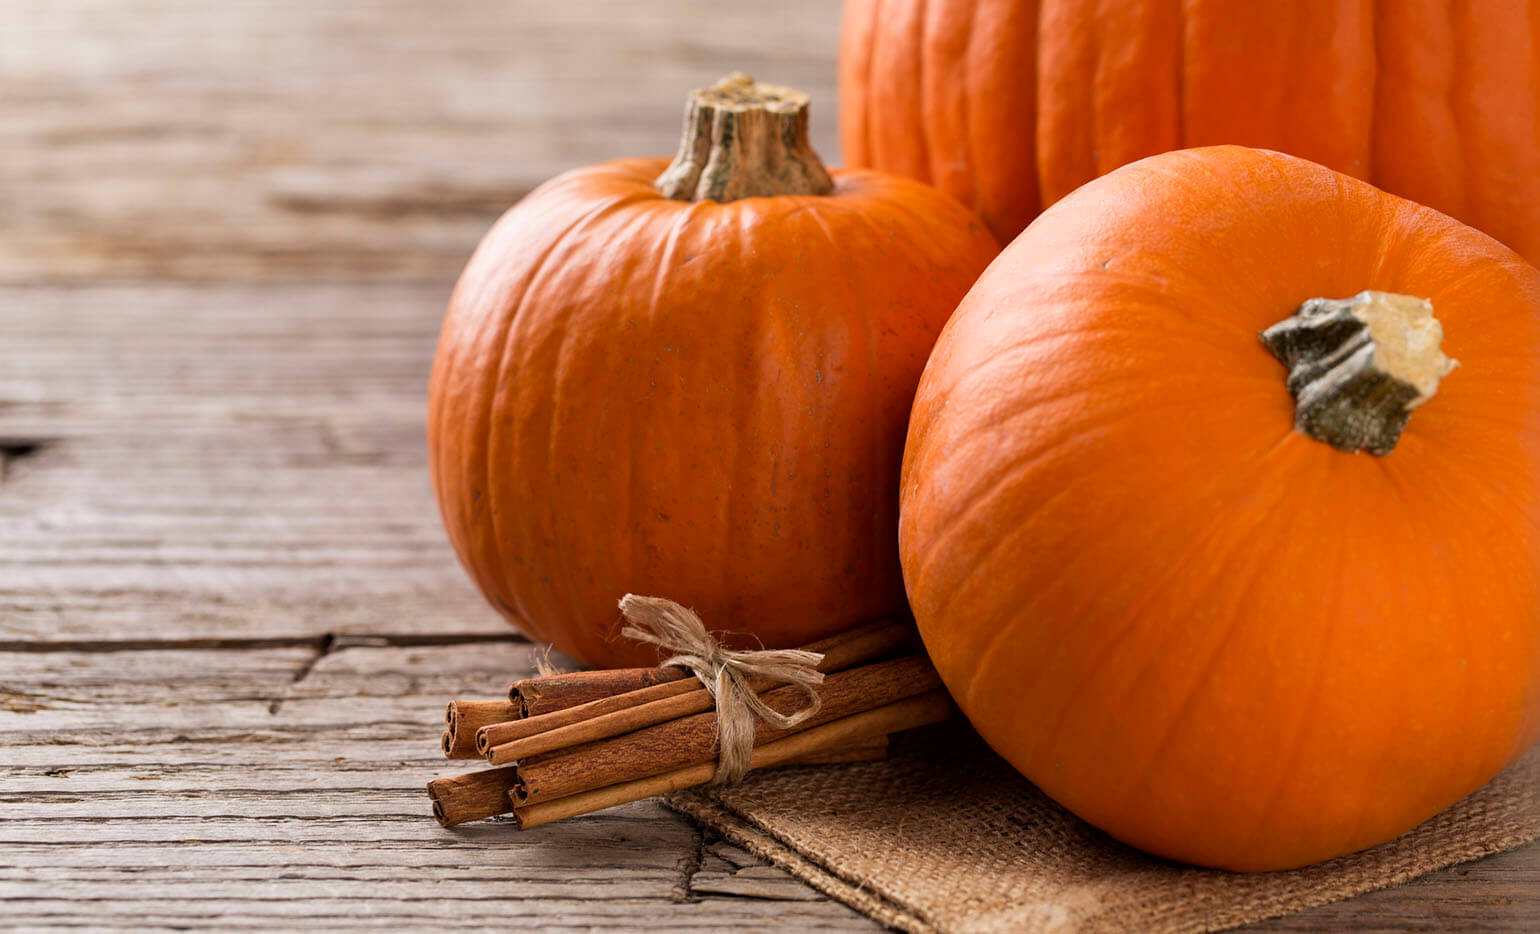 What Fall Food Are You? pumpkins